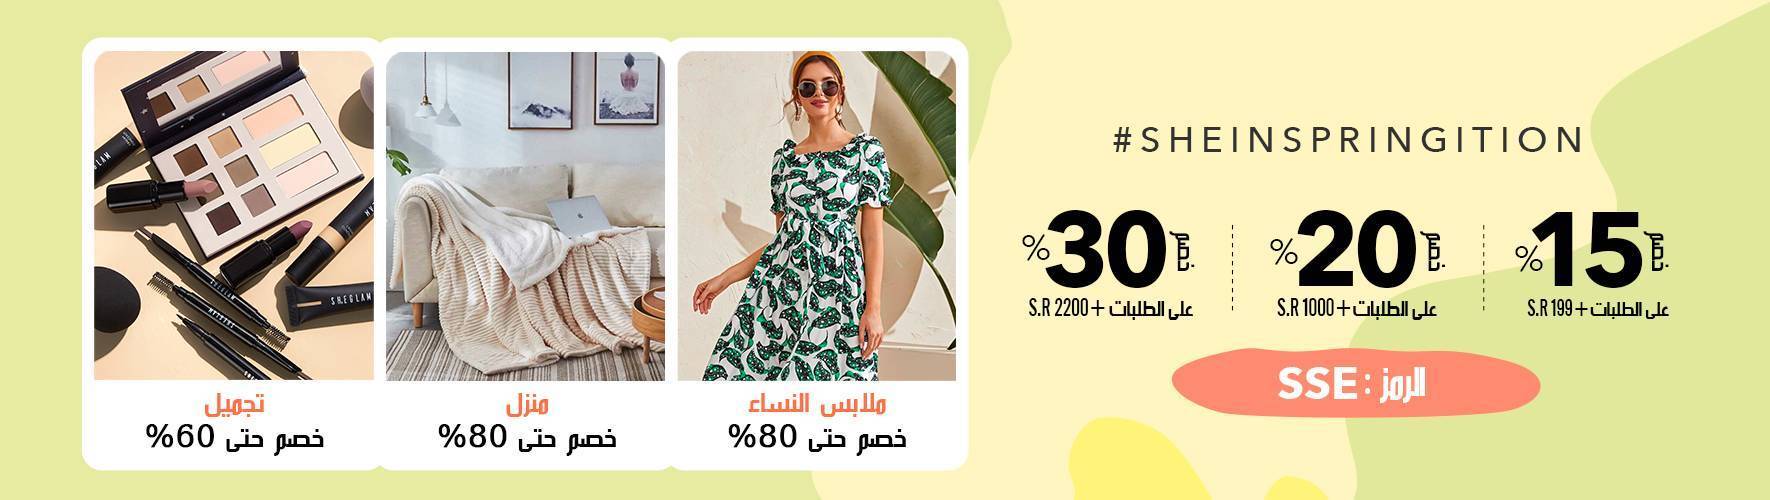 Shein Coupon Up To 30% OFF + Up To 80% OFF Sale | Shein KSA 2